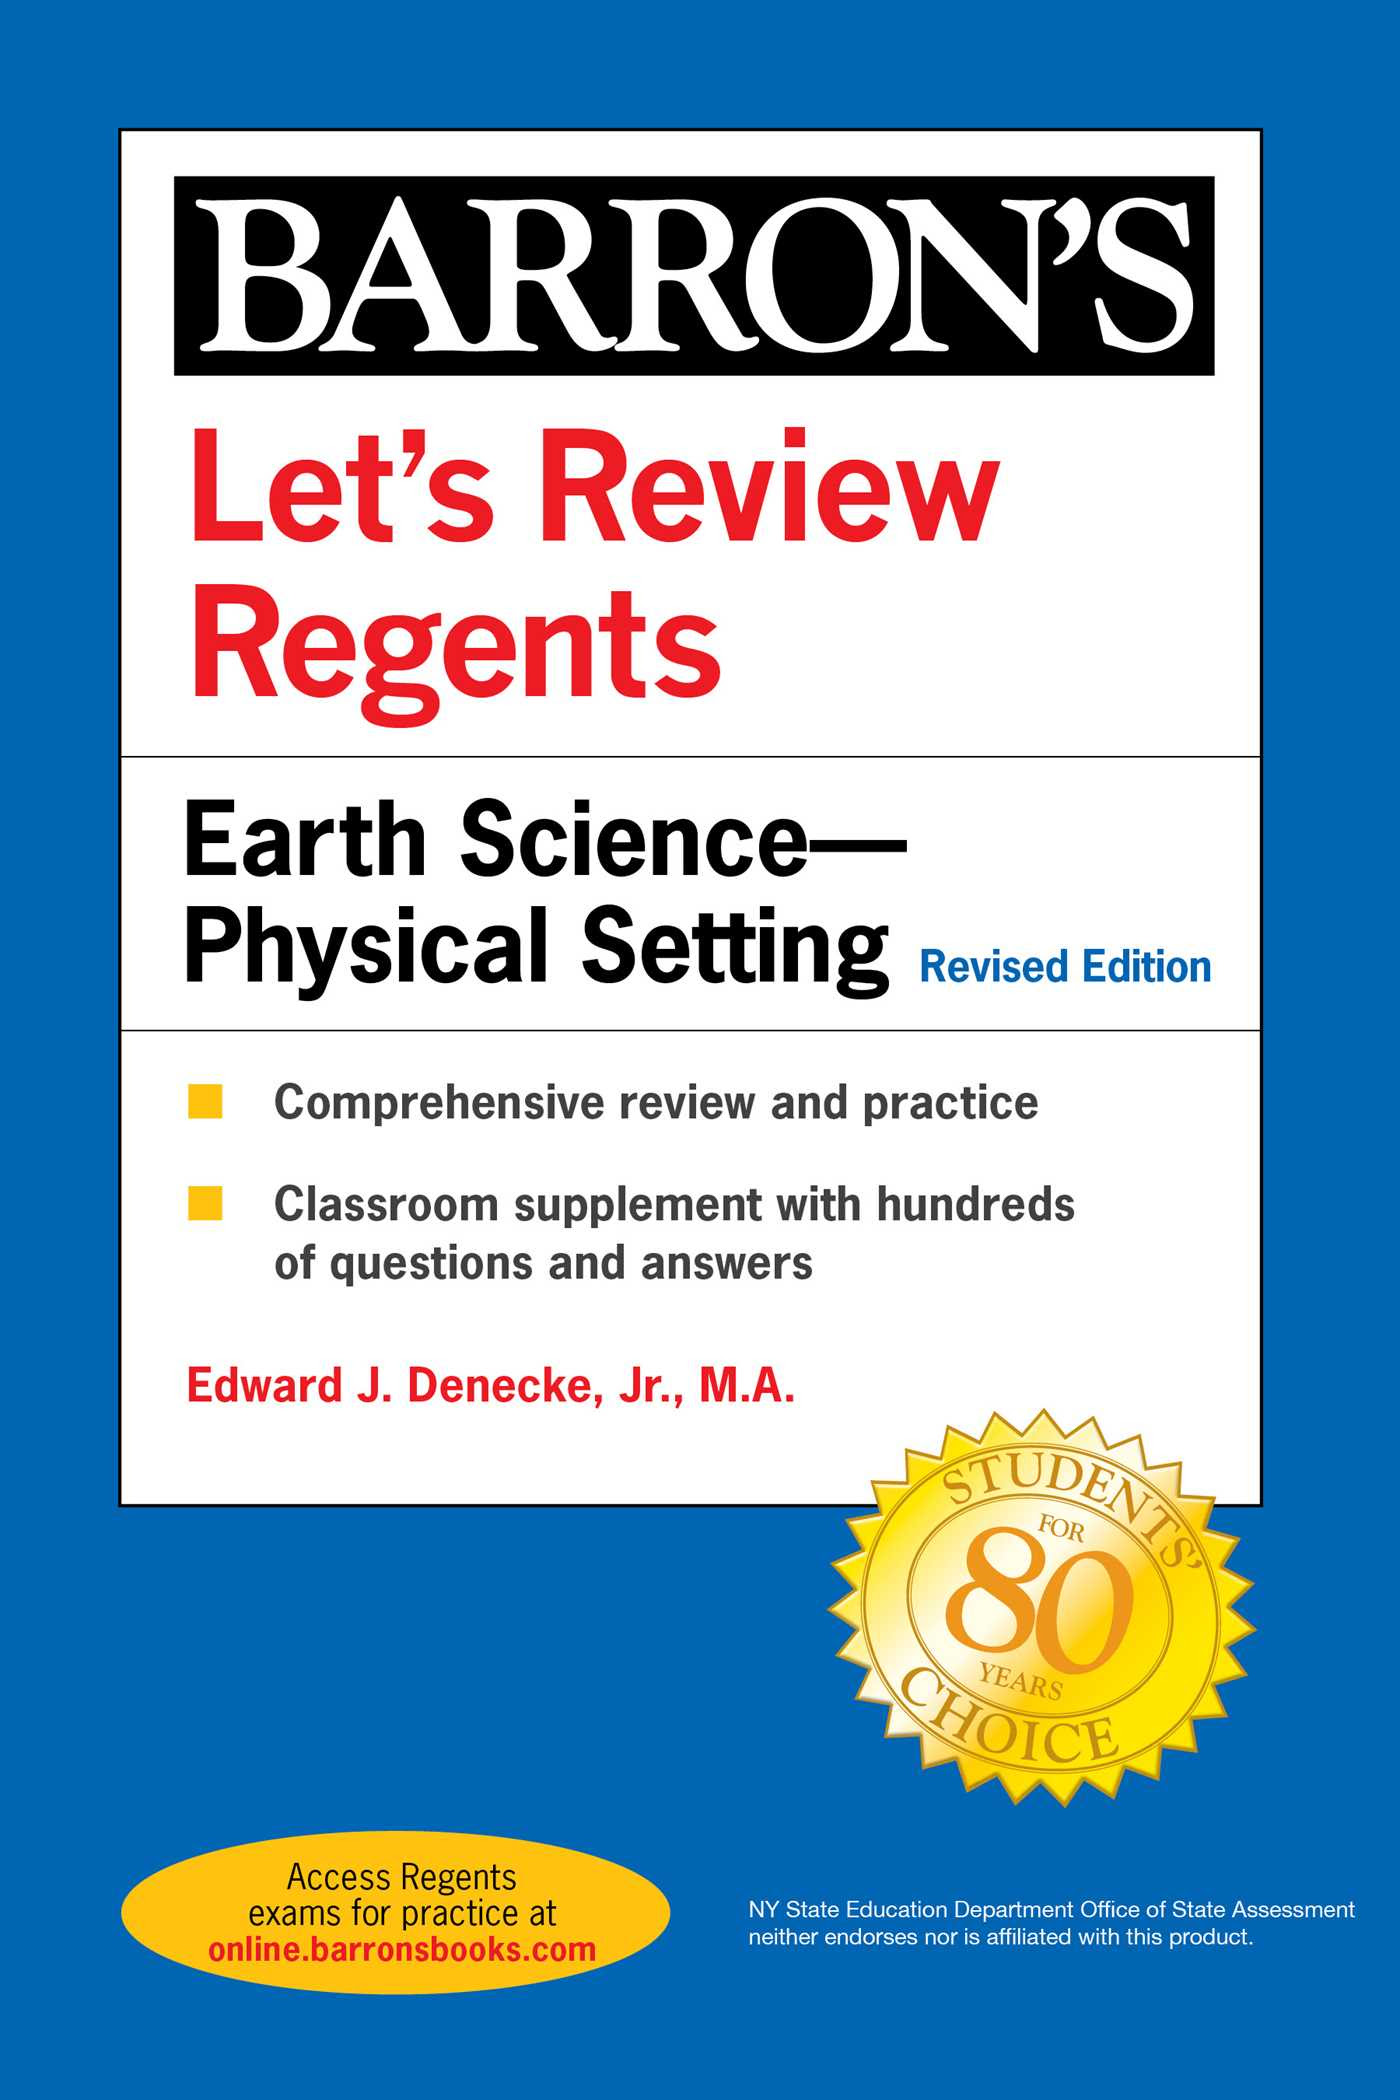 Let's Review Regents: Earth Science--Physical Setting Revised Edition EPUB